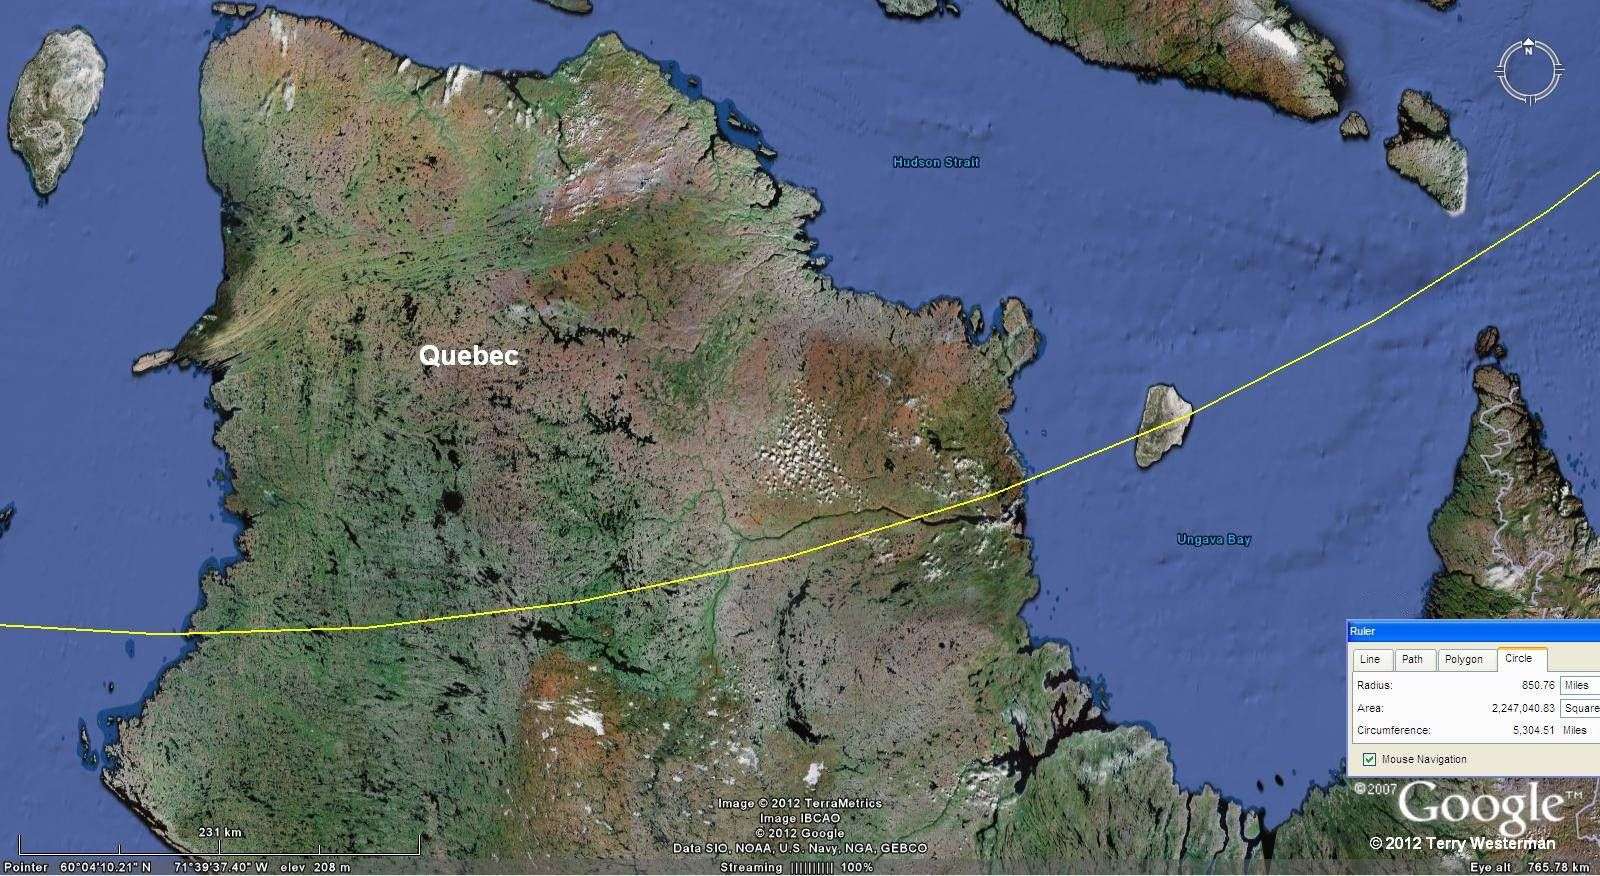 The Baffin Island 850 mile radius seismic circle and the  Arnaud River valley in Quebec.